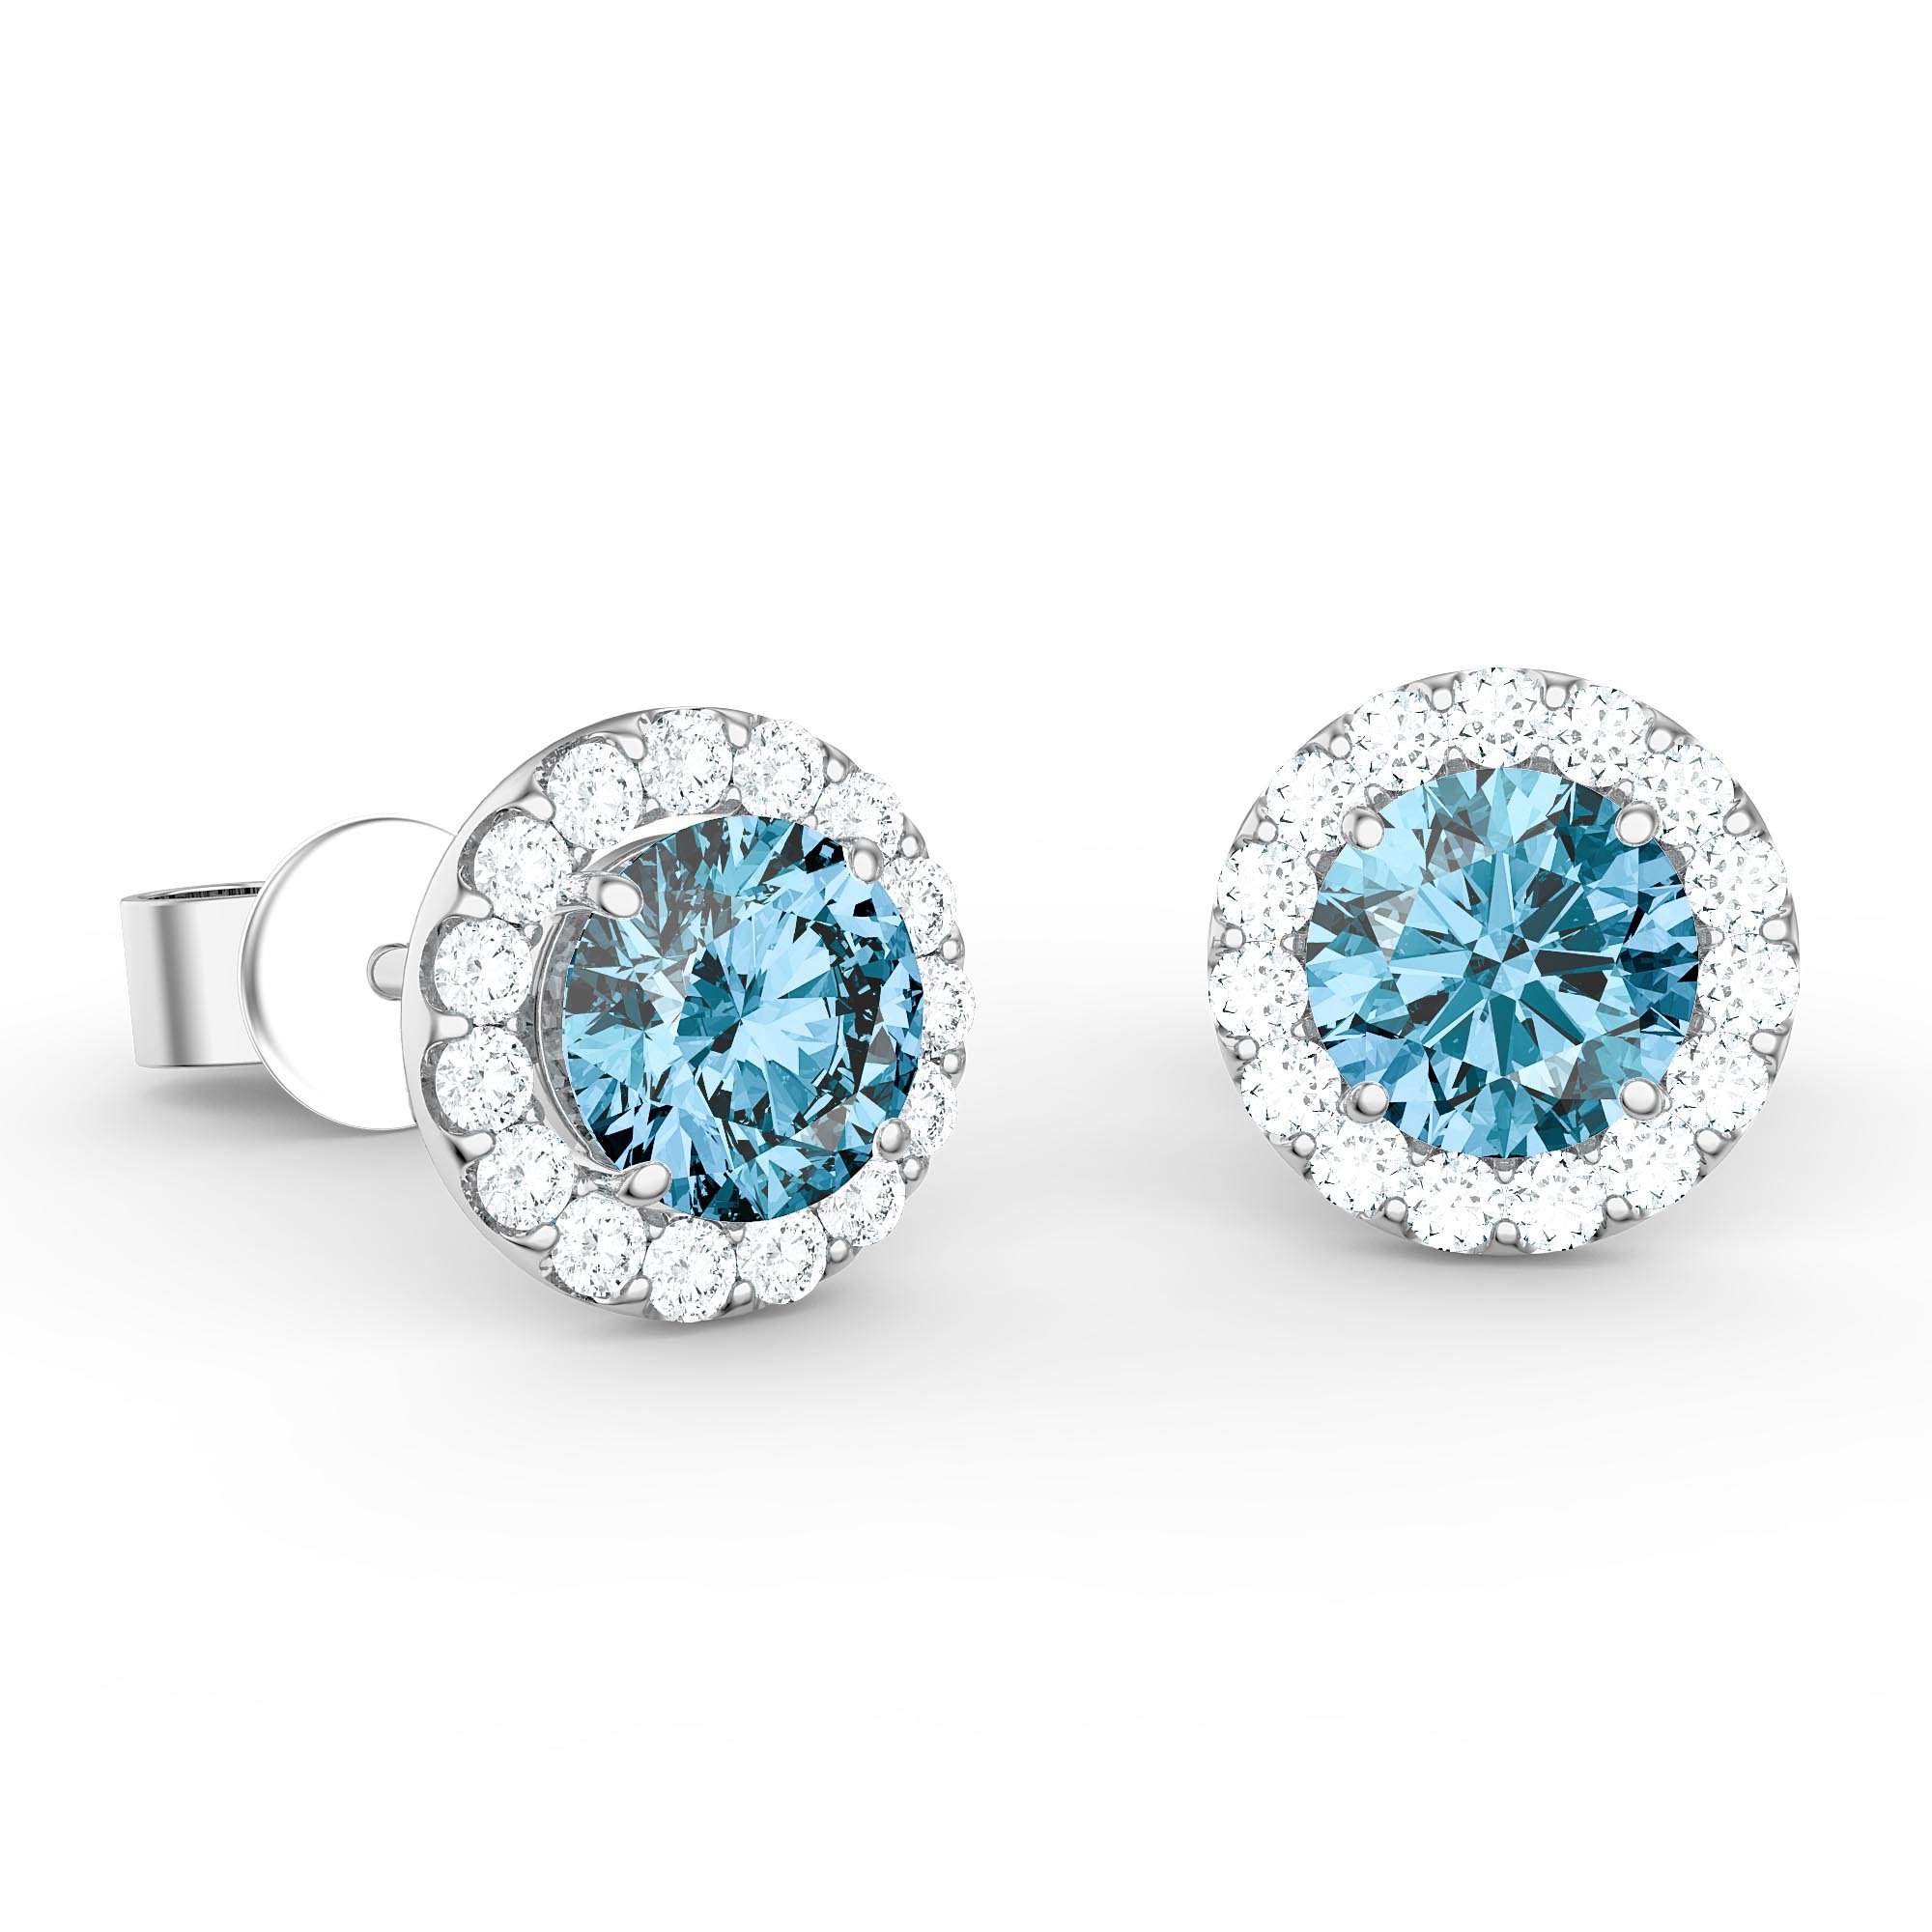 Details about   10k White Gold Oval Blue Topaz And Diamond Earrings